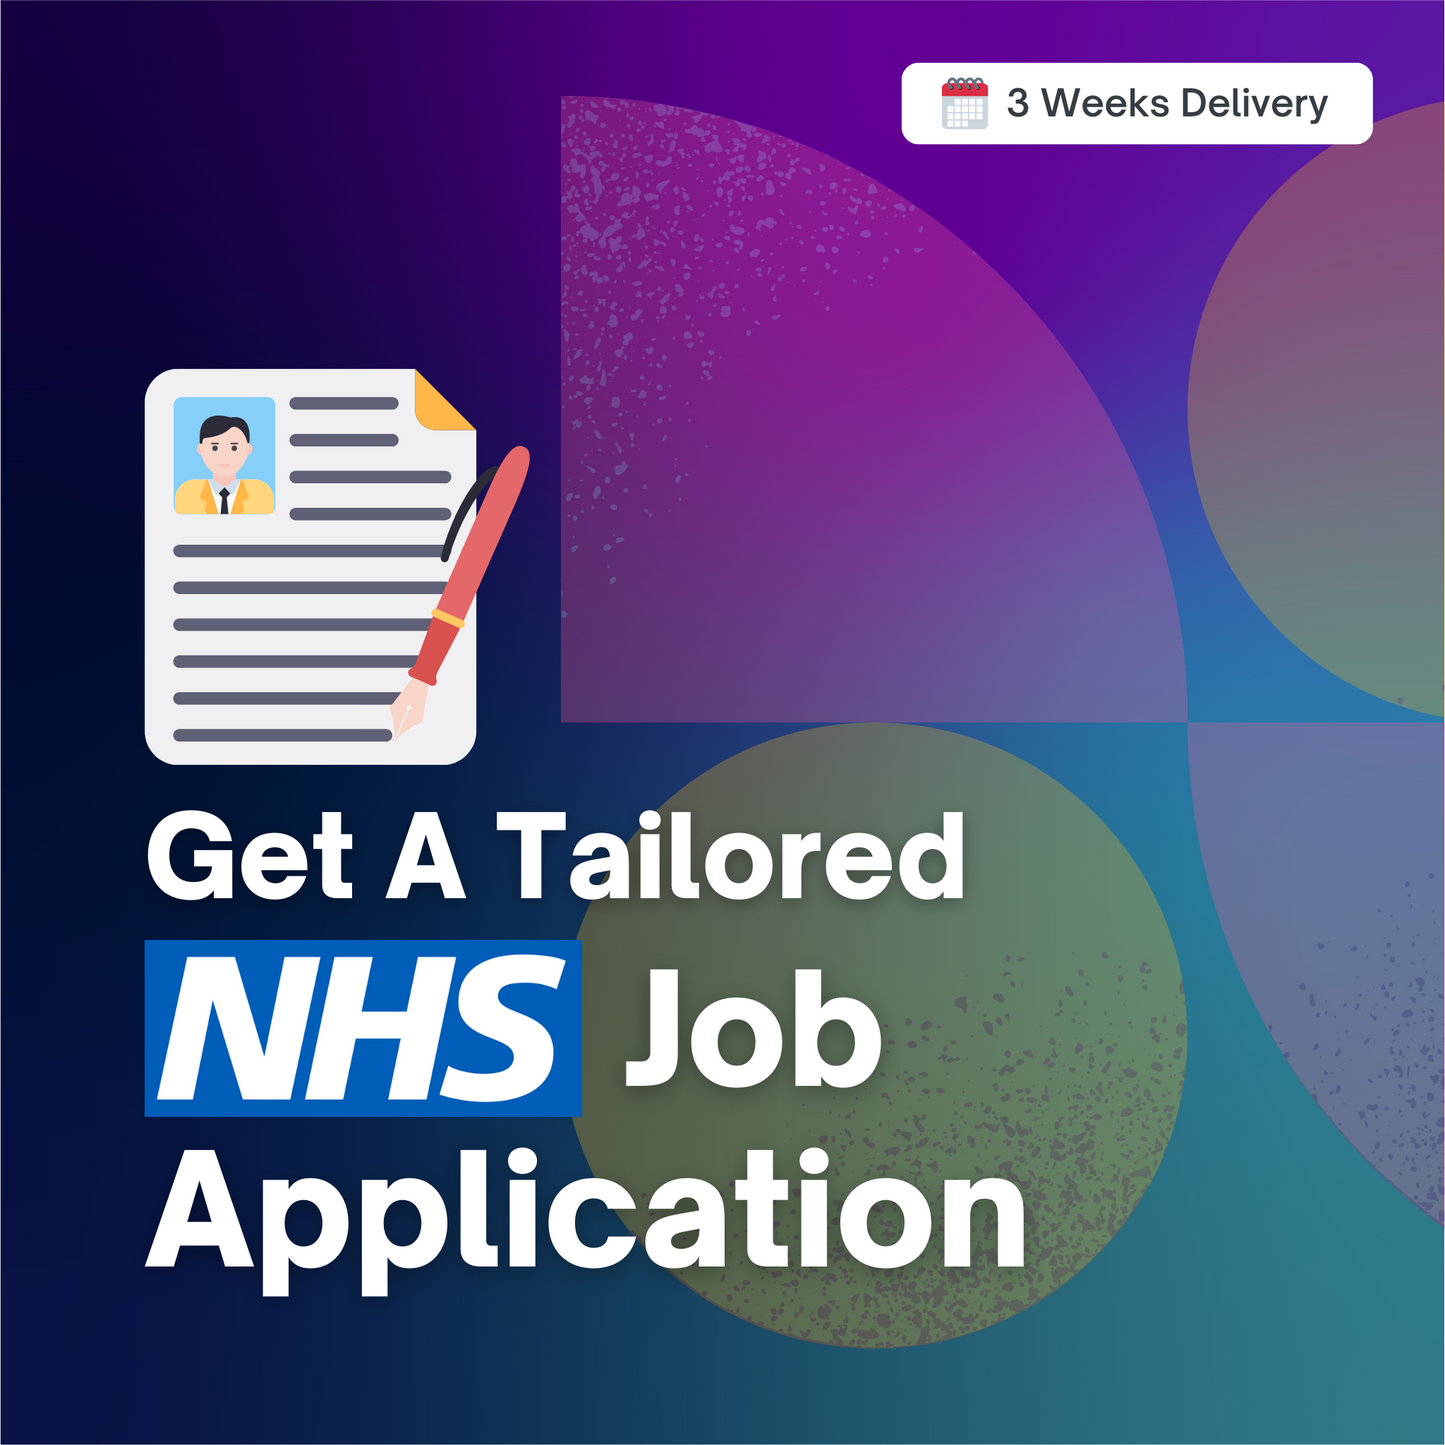 Get Your Full NHS Job Profile Written